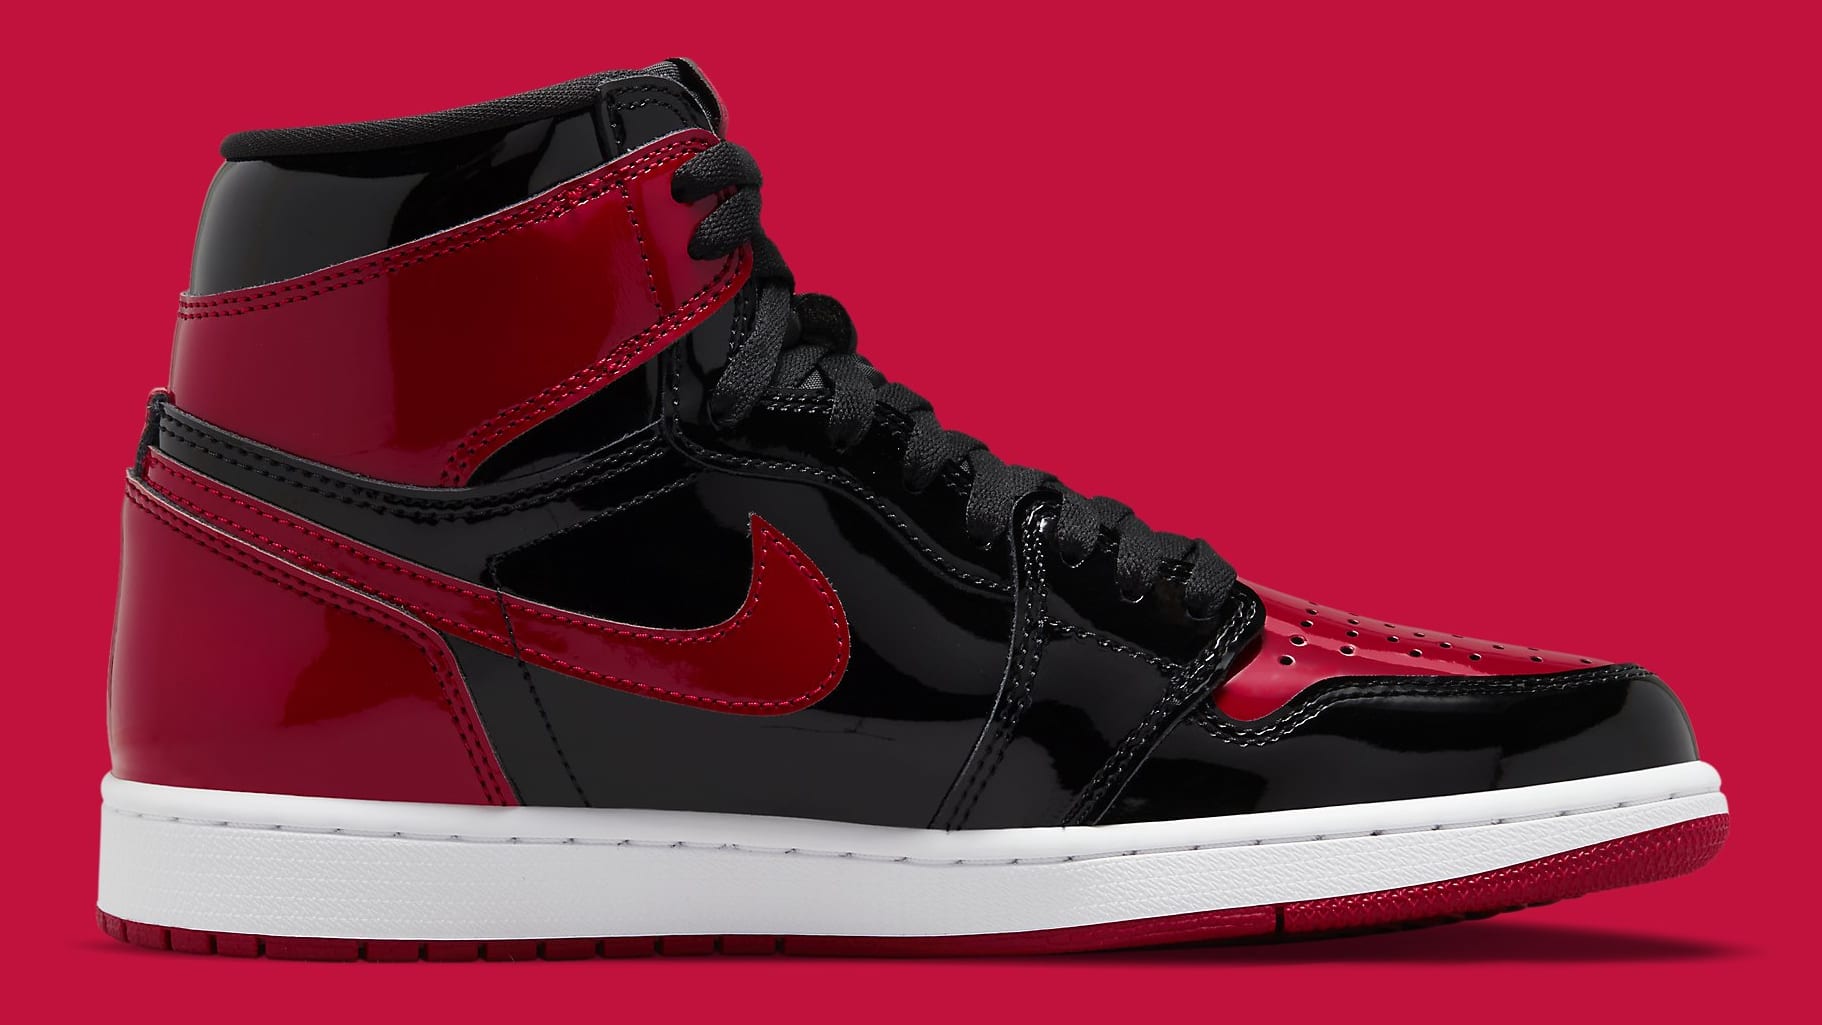 Air Jordan 1 I Bred Patent Leather Release Date 555088-063 Medial